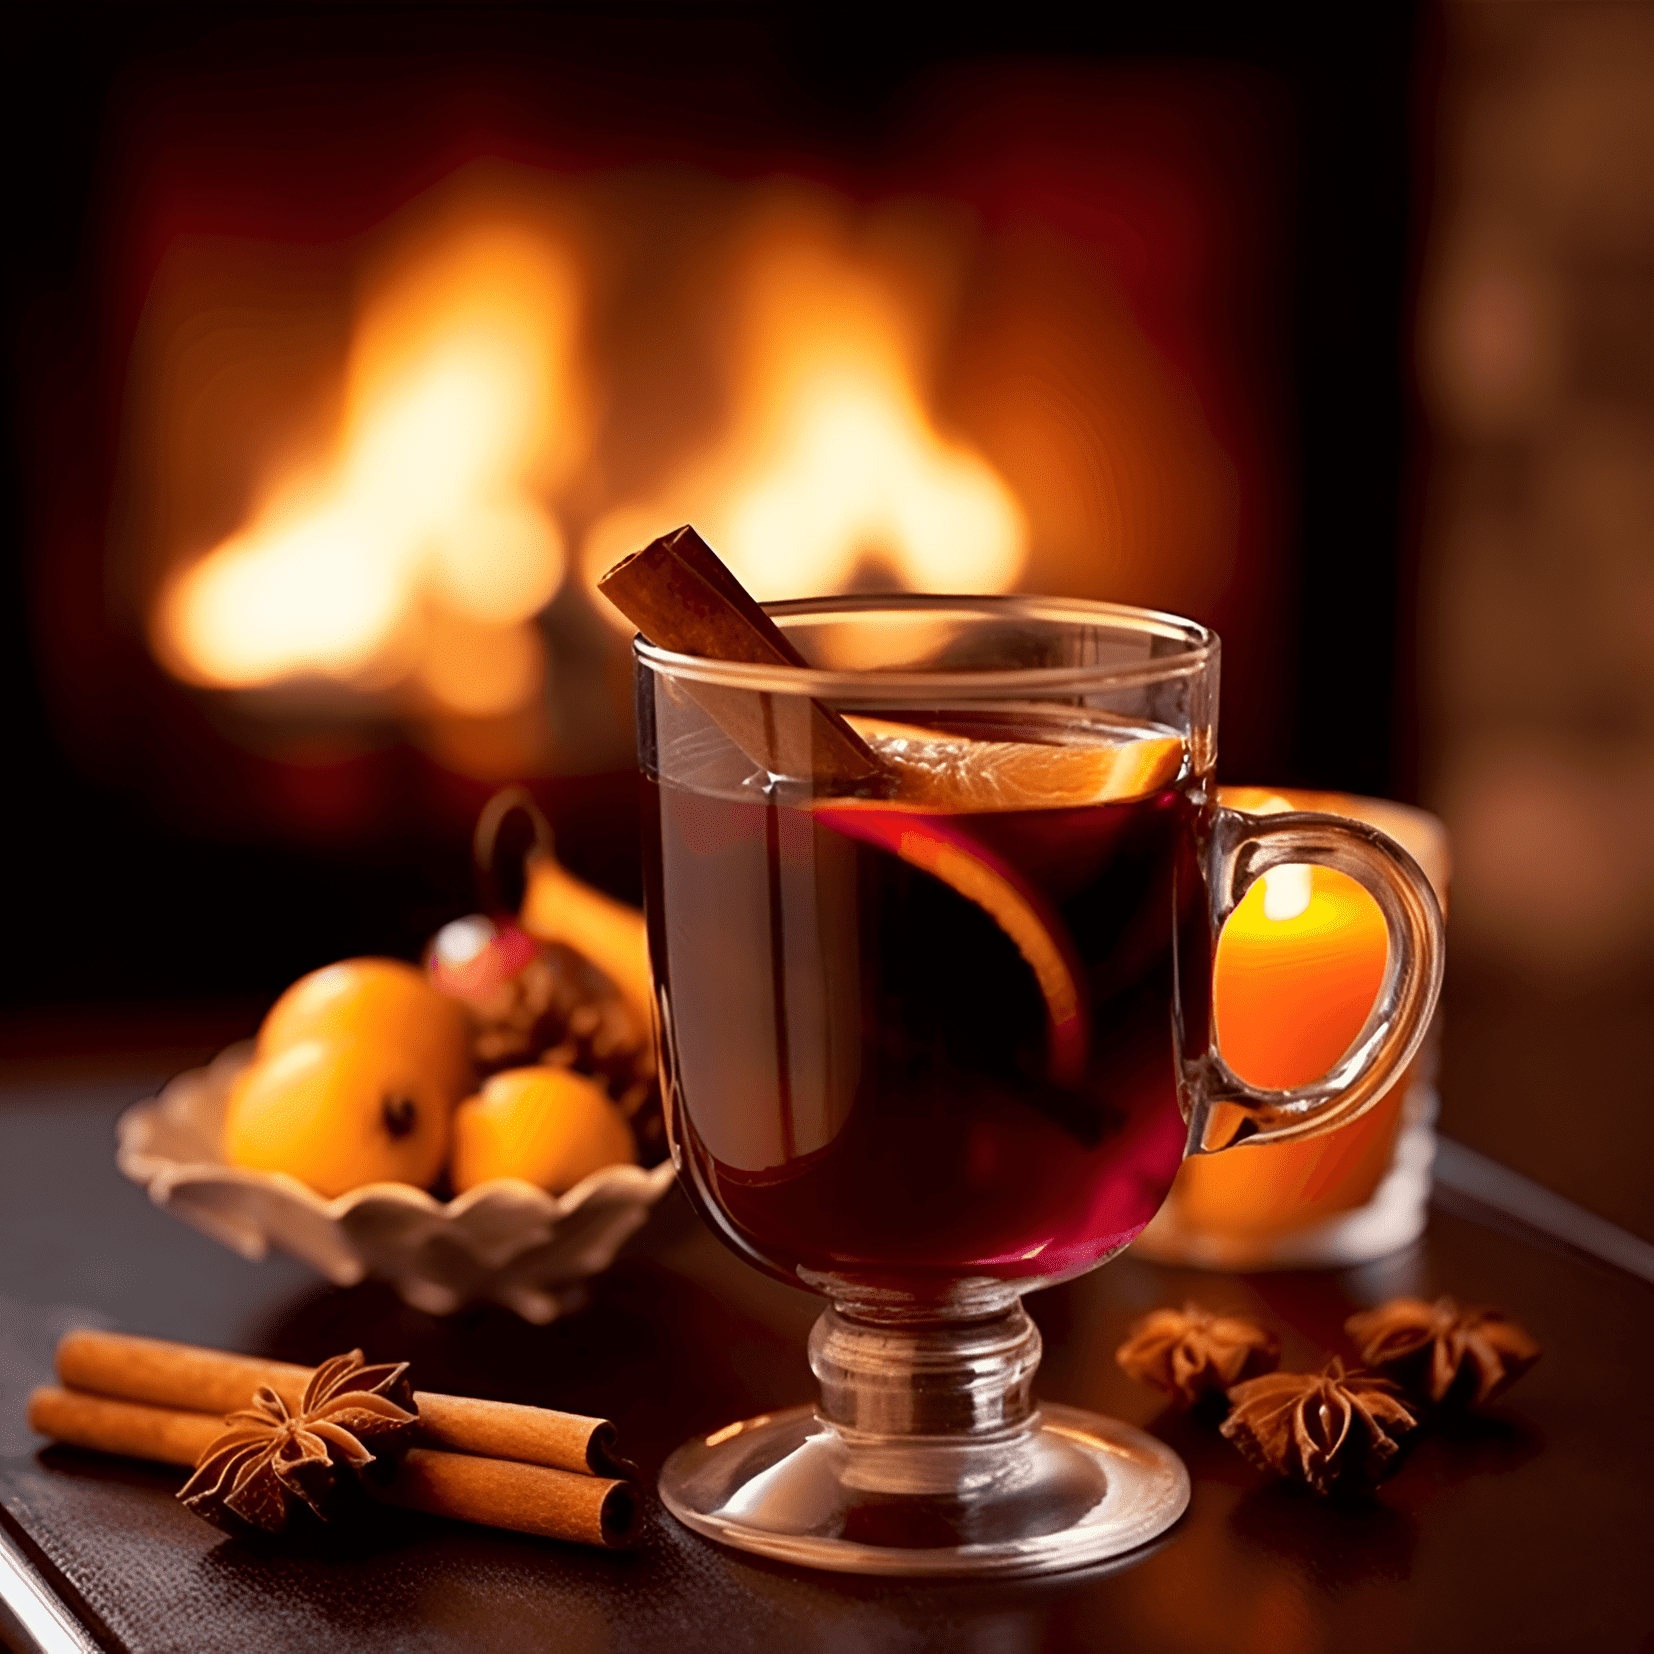 Mulled Wine Cocktail Recipe - Mulled Wine has a warm, sweet, and slightly spicy taste. The combination of red wine, spices, and citrus fruits creates a rich and comforting flavor profile that is perfect for cold winter nights.